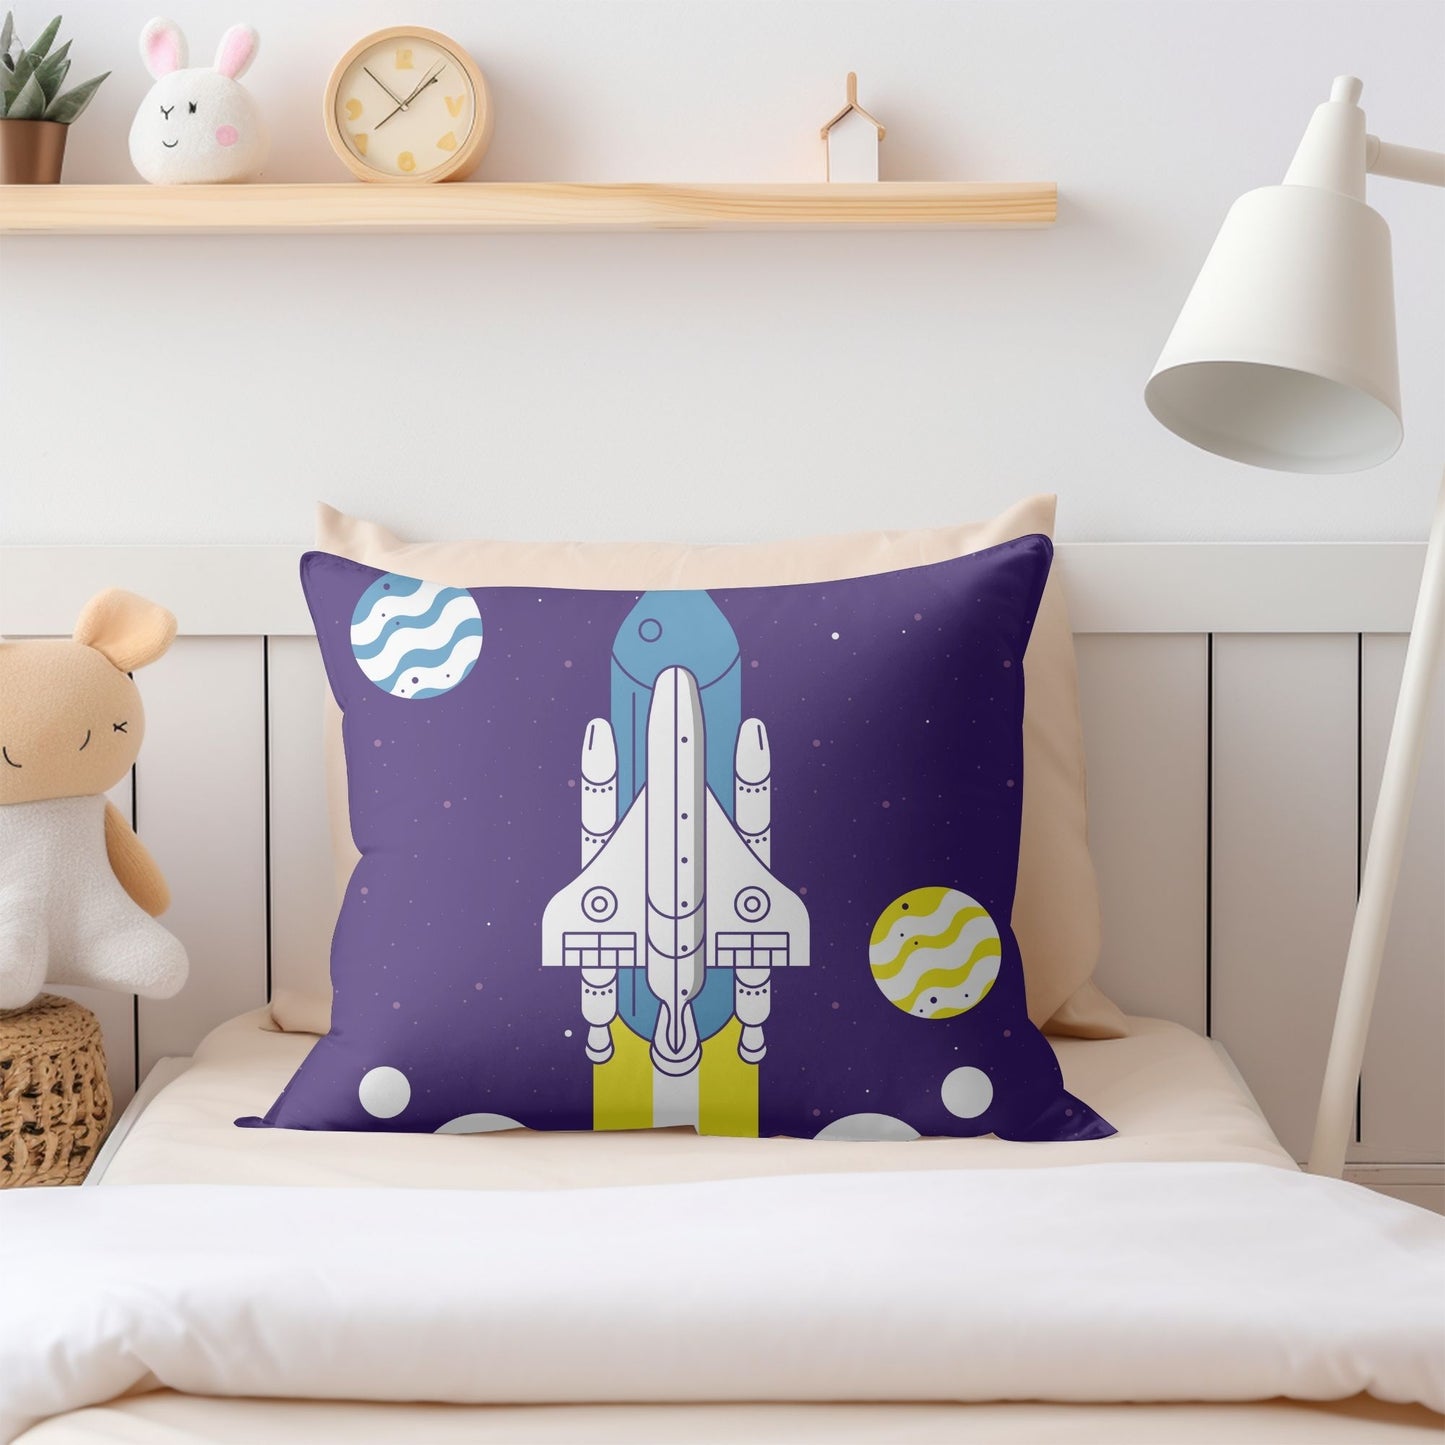 Cozy pillow with an exciting space rocket takeoff motif for children's comfort.